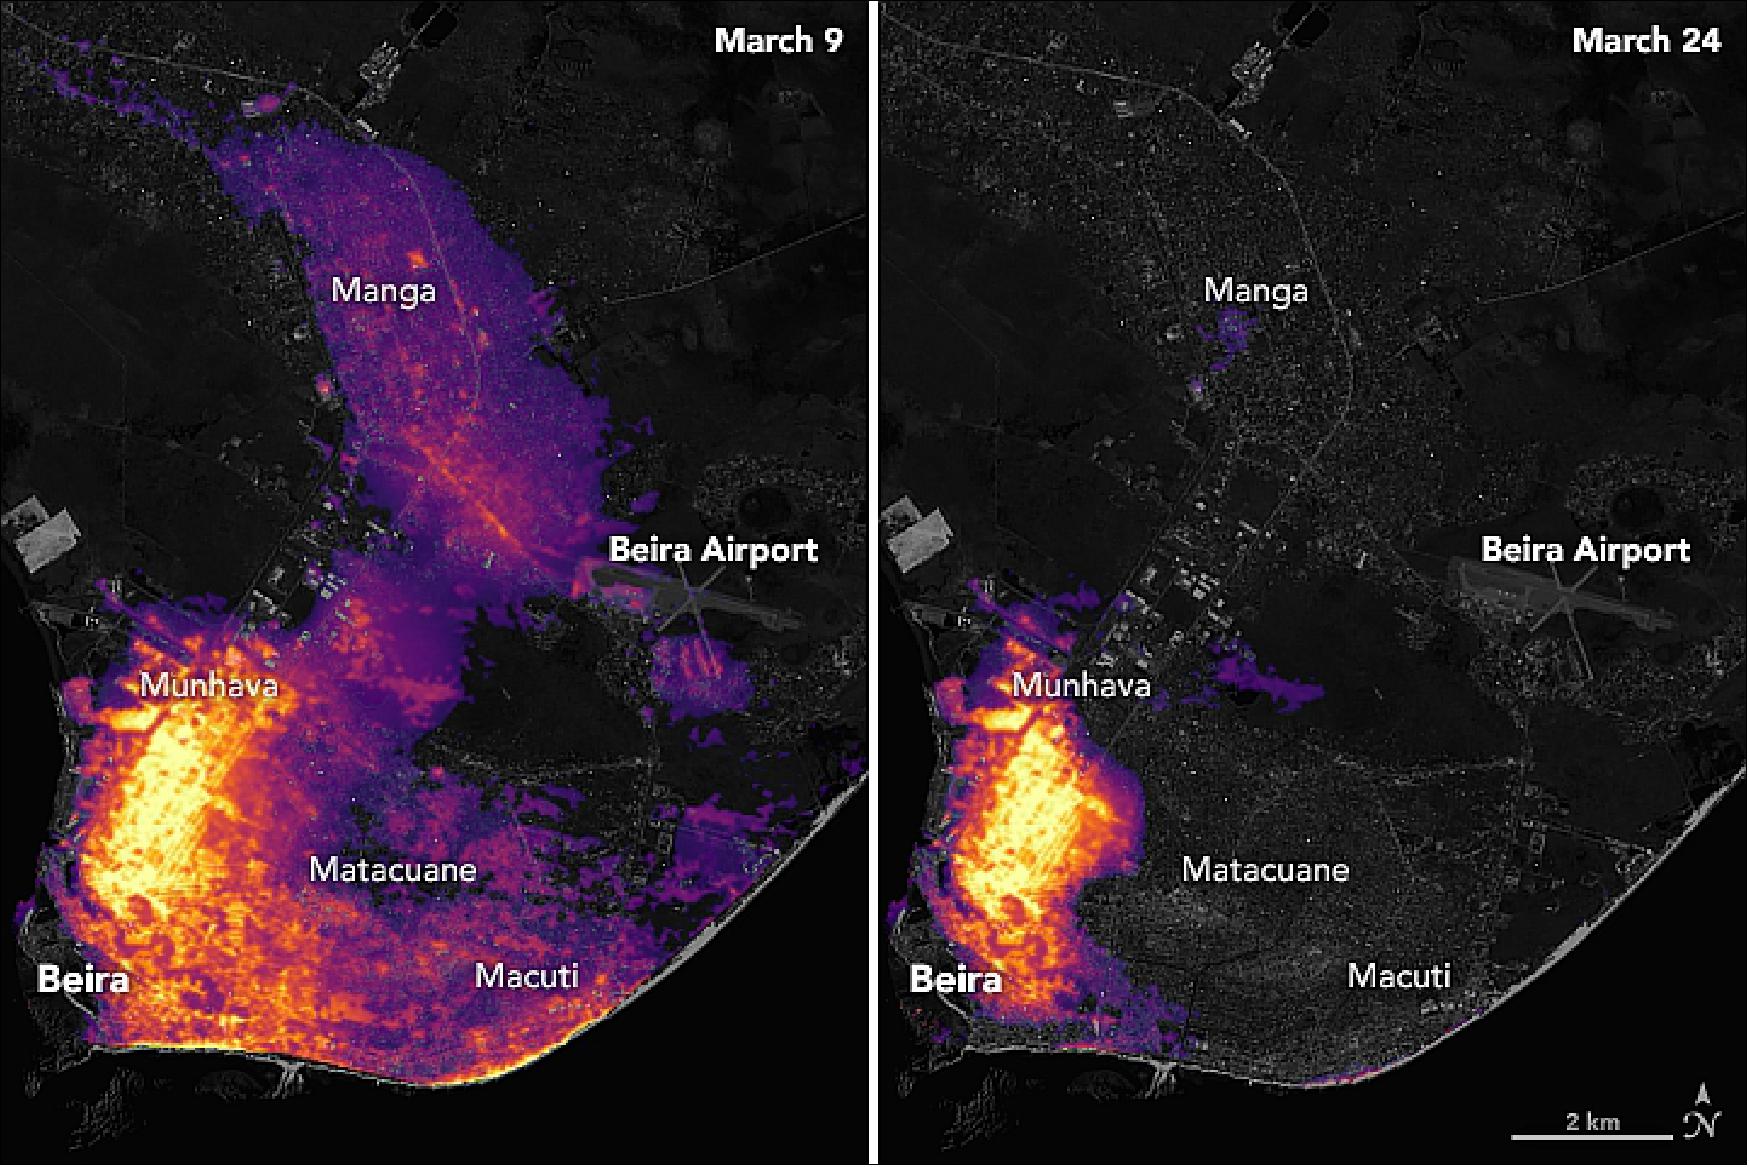 Figure 56: The image on the left shows the extent of electric lighting across Beira on March 9, 2019, a typical night before the storm hit; the image on the right shows light on March 24, 2019, three days after Idai had passed. Most of the lights in Manga, Matacuane, and Macuti appeared to be out. According to news reports, the storm destroyed nearly 90 percent of the city (image credit: NASA Earth Observatory, images by Joshua Stevens, using Black Marble data courtesy of Ranjay Shrestha/NASA Goddard Space Flight Center, and Landsat data from the U.S. Geological Survey. Story by Kasha Patel)